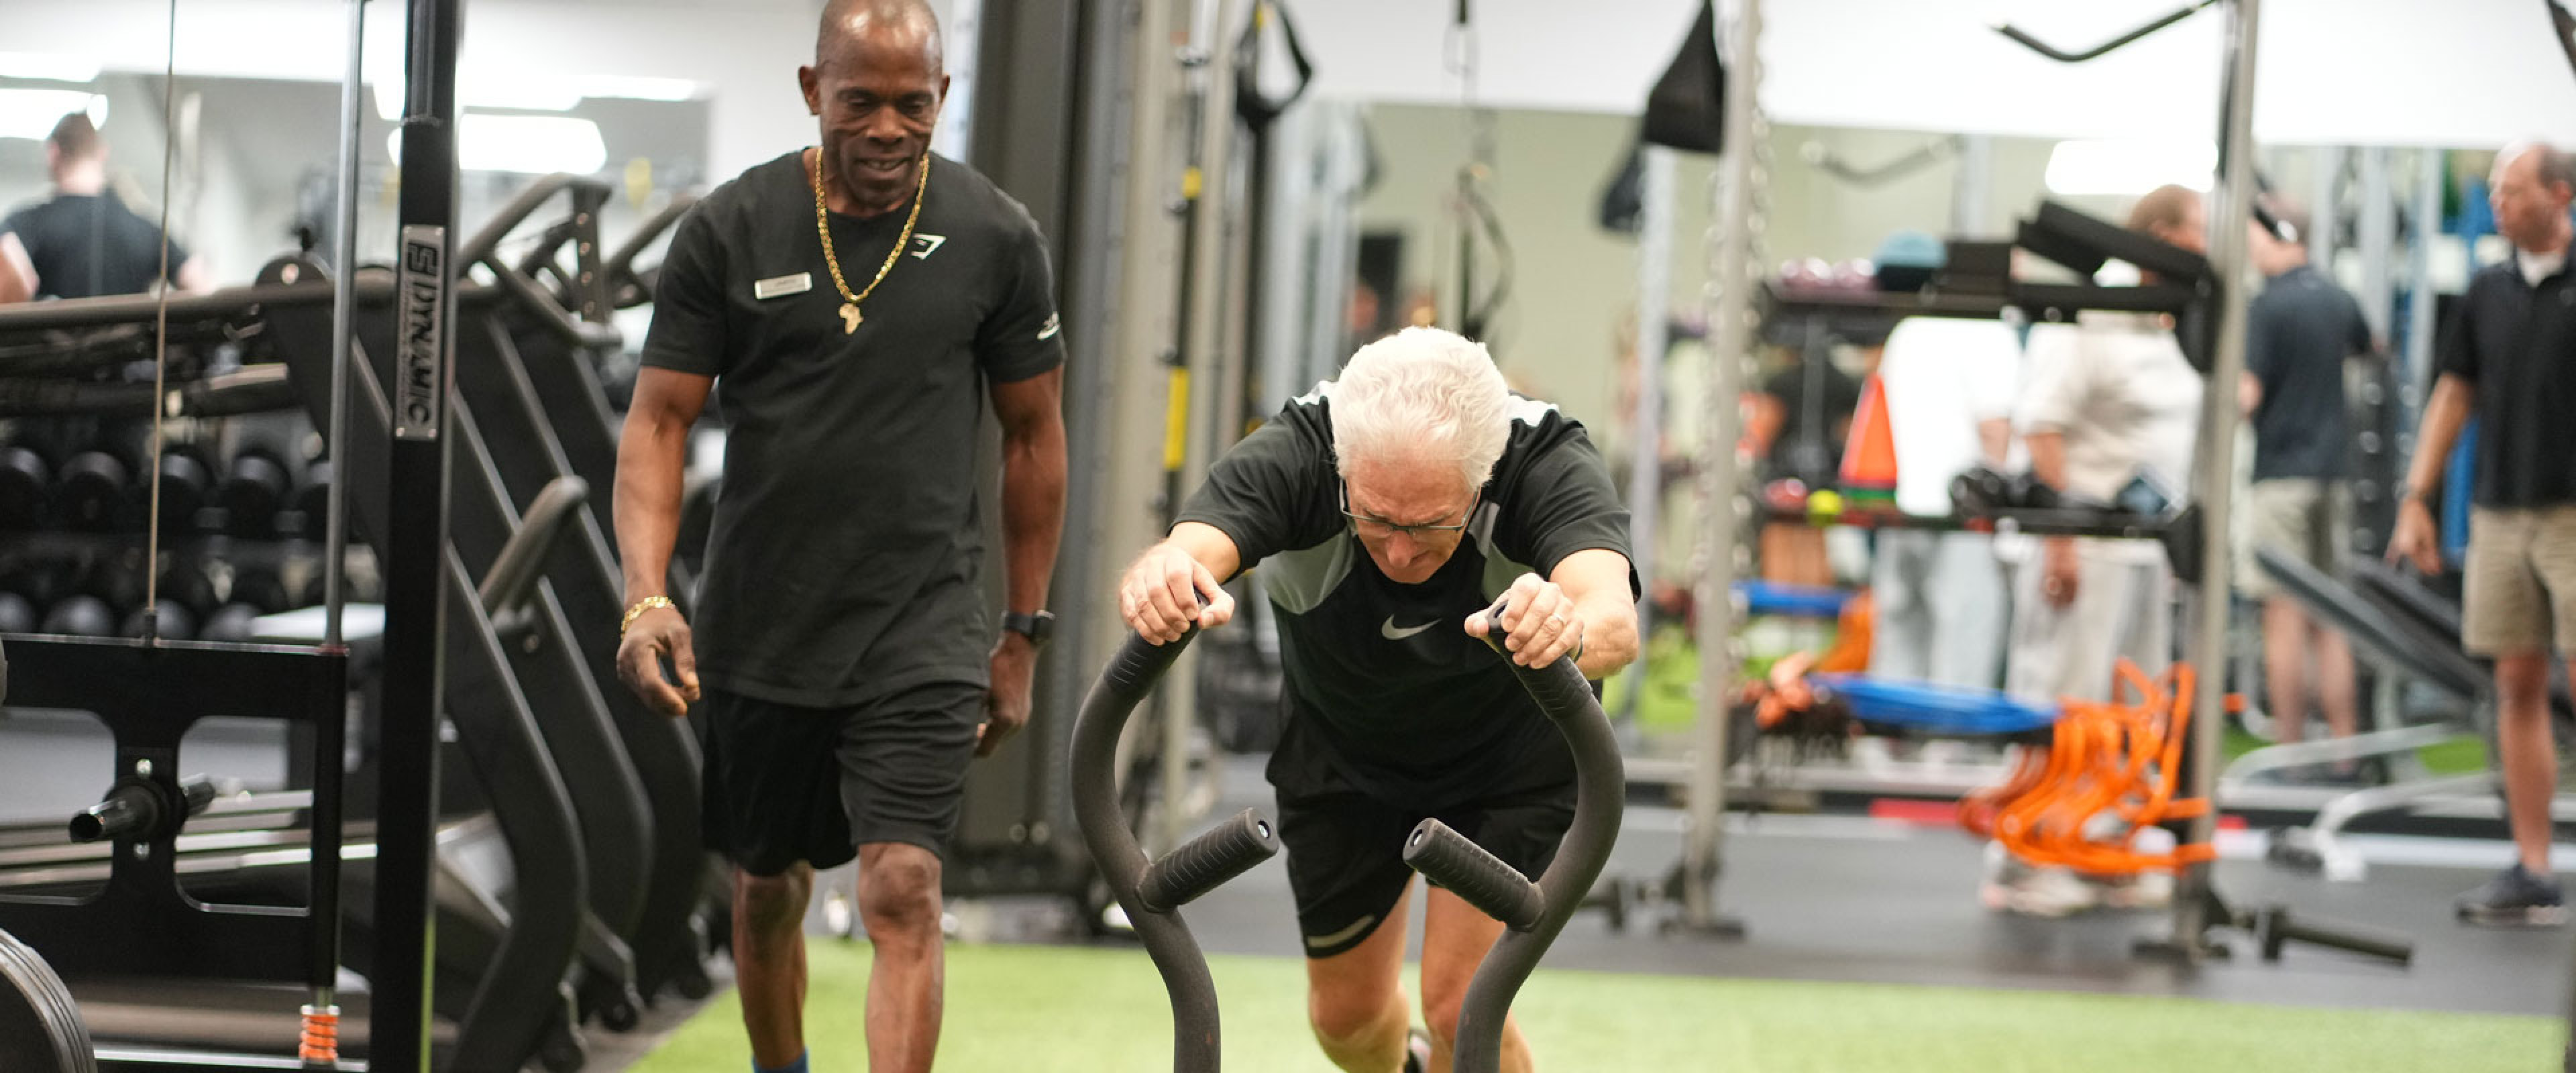 Black personal trainer assisting an older gentleman on the turf